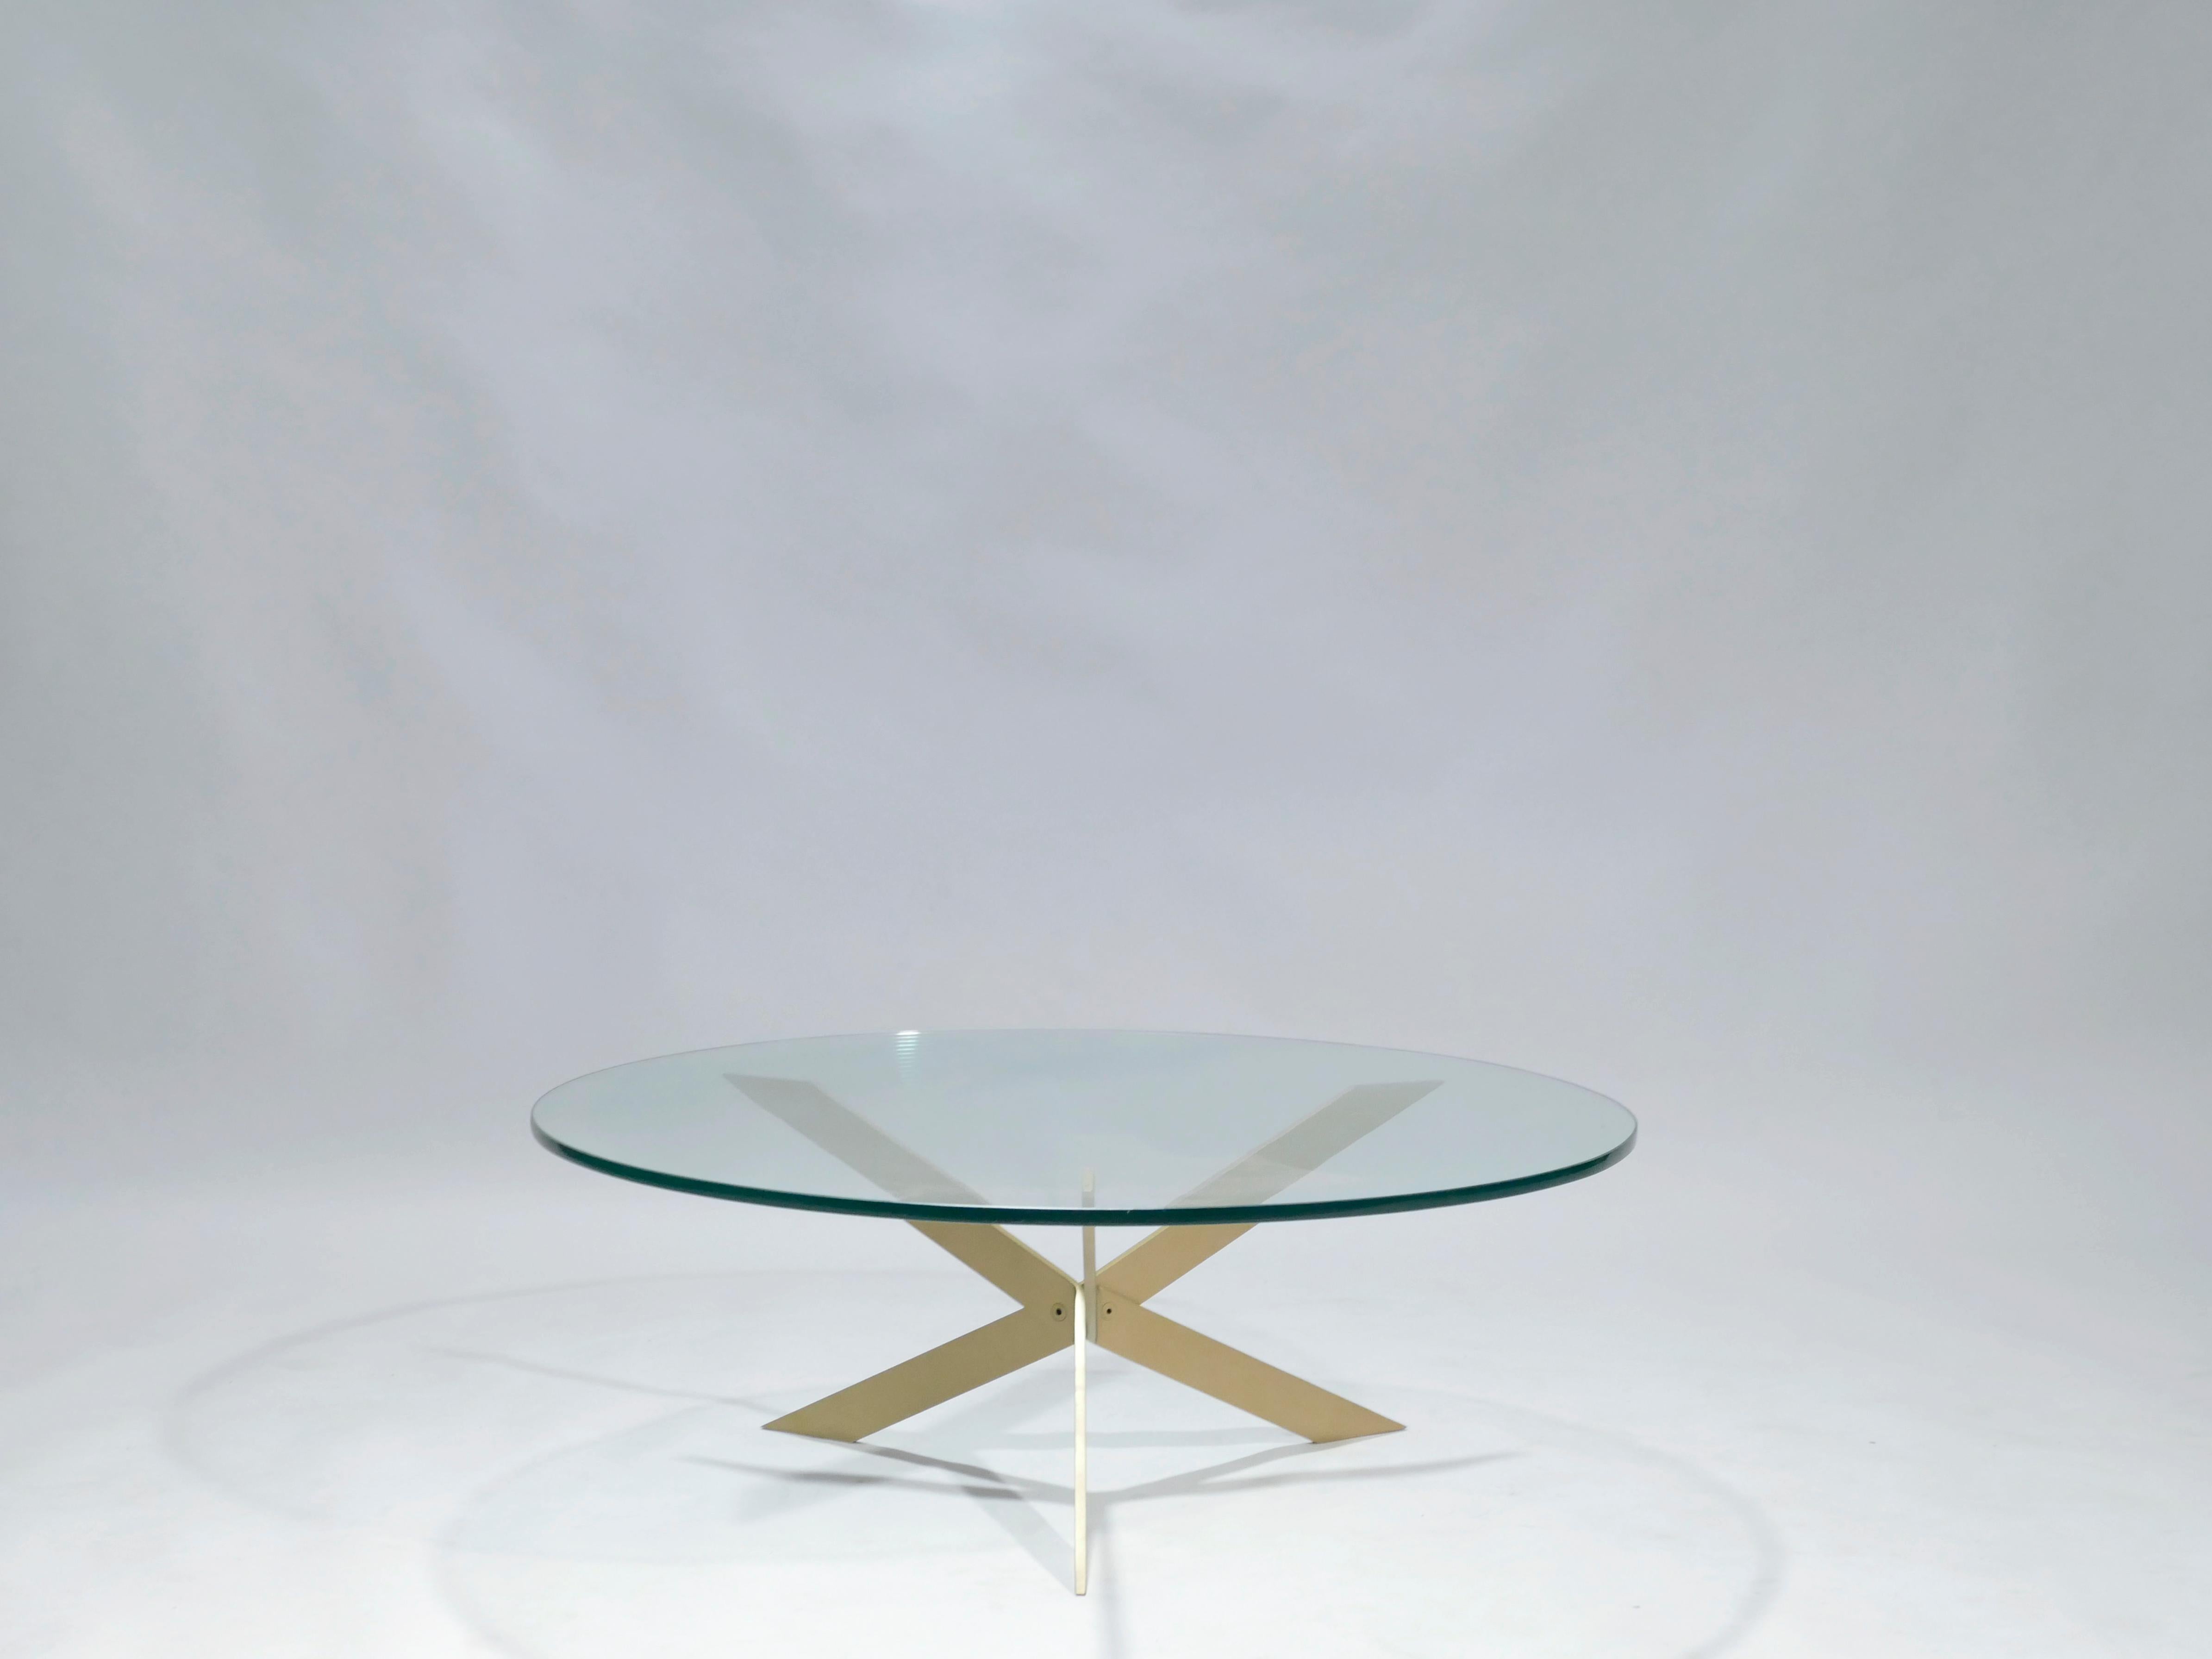 Three inventive brass structures serve as criss crossing legs in this Mid-Century Modern coffee table. Heavy, transparent glass is cut into a sleek circle to form the surface, allowing the intriguing arrangement of the legs, full of sharp angles, to